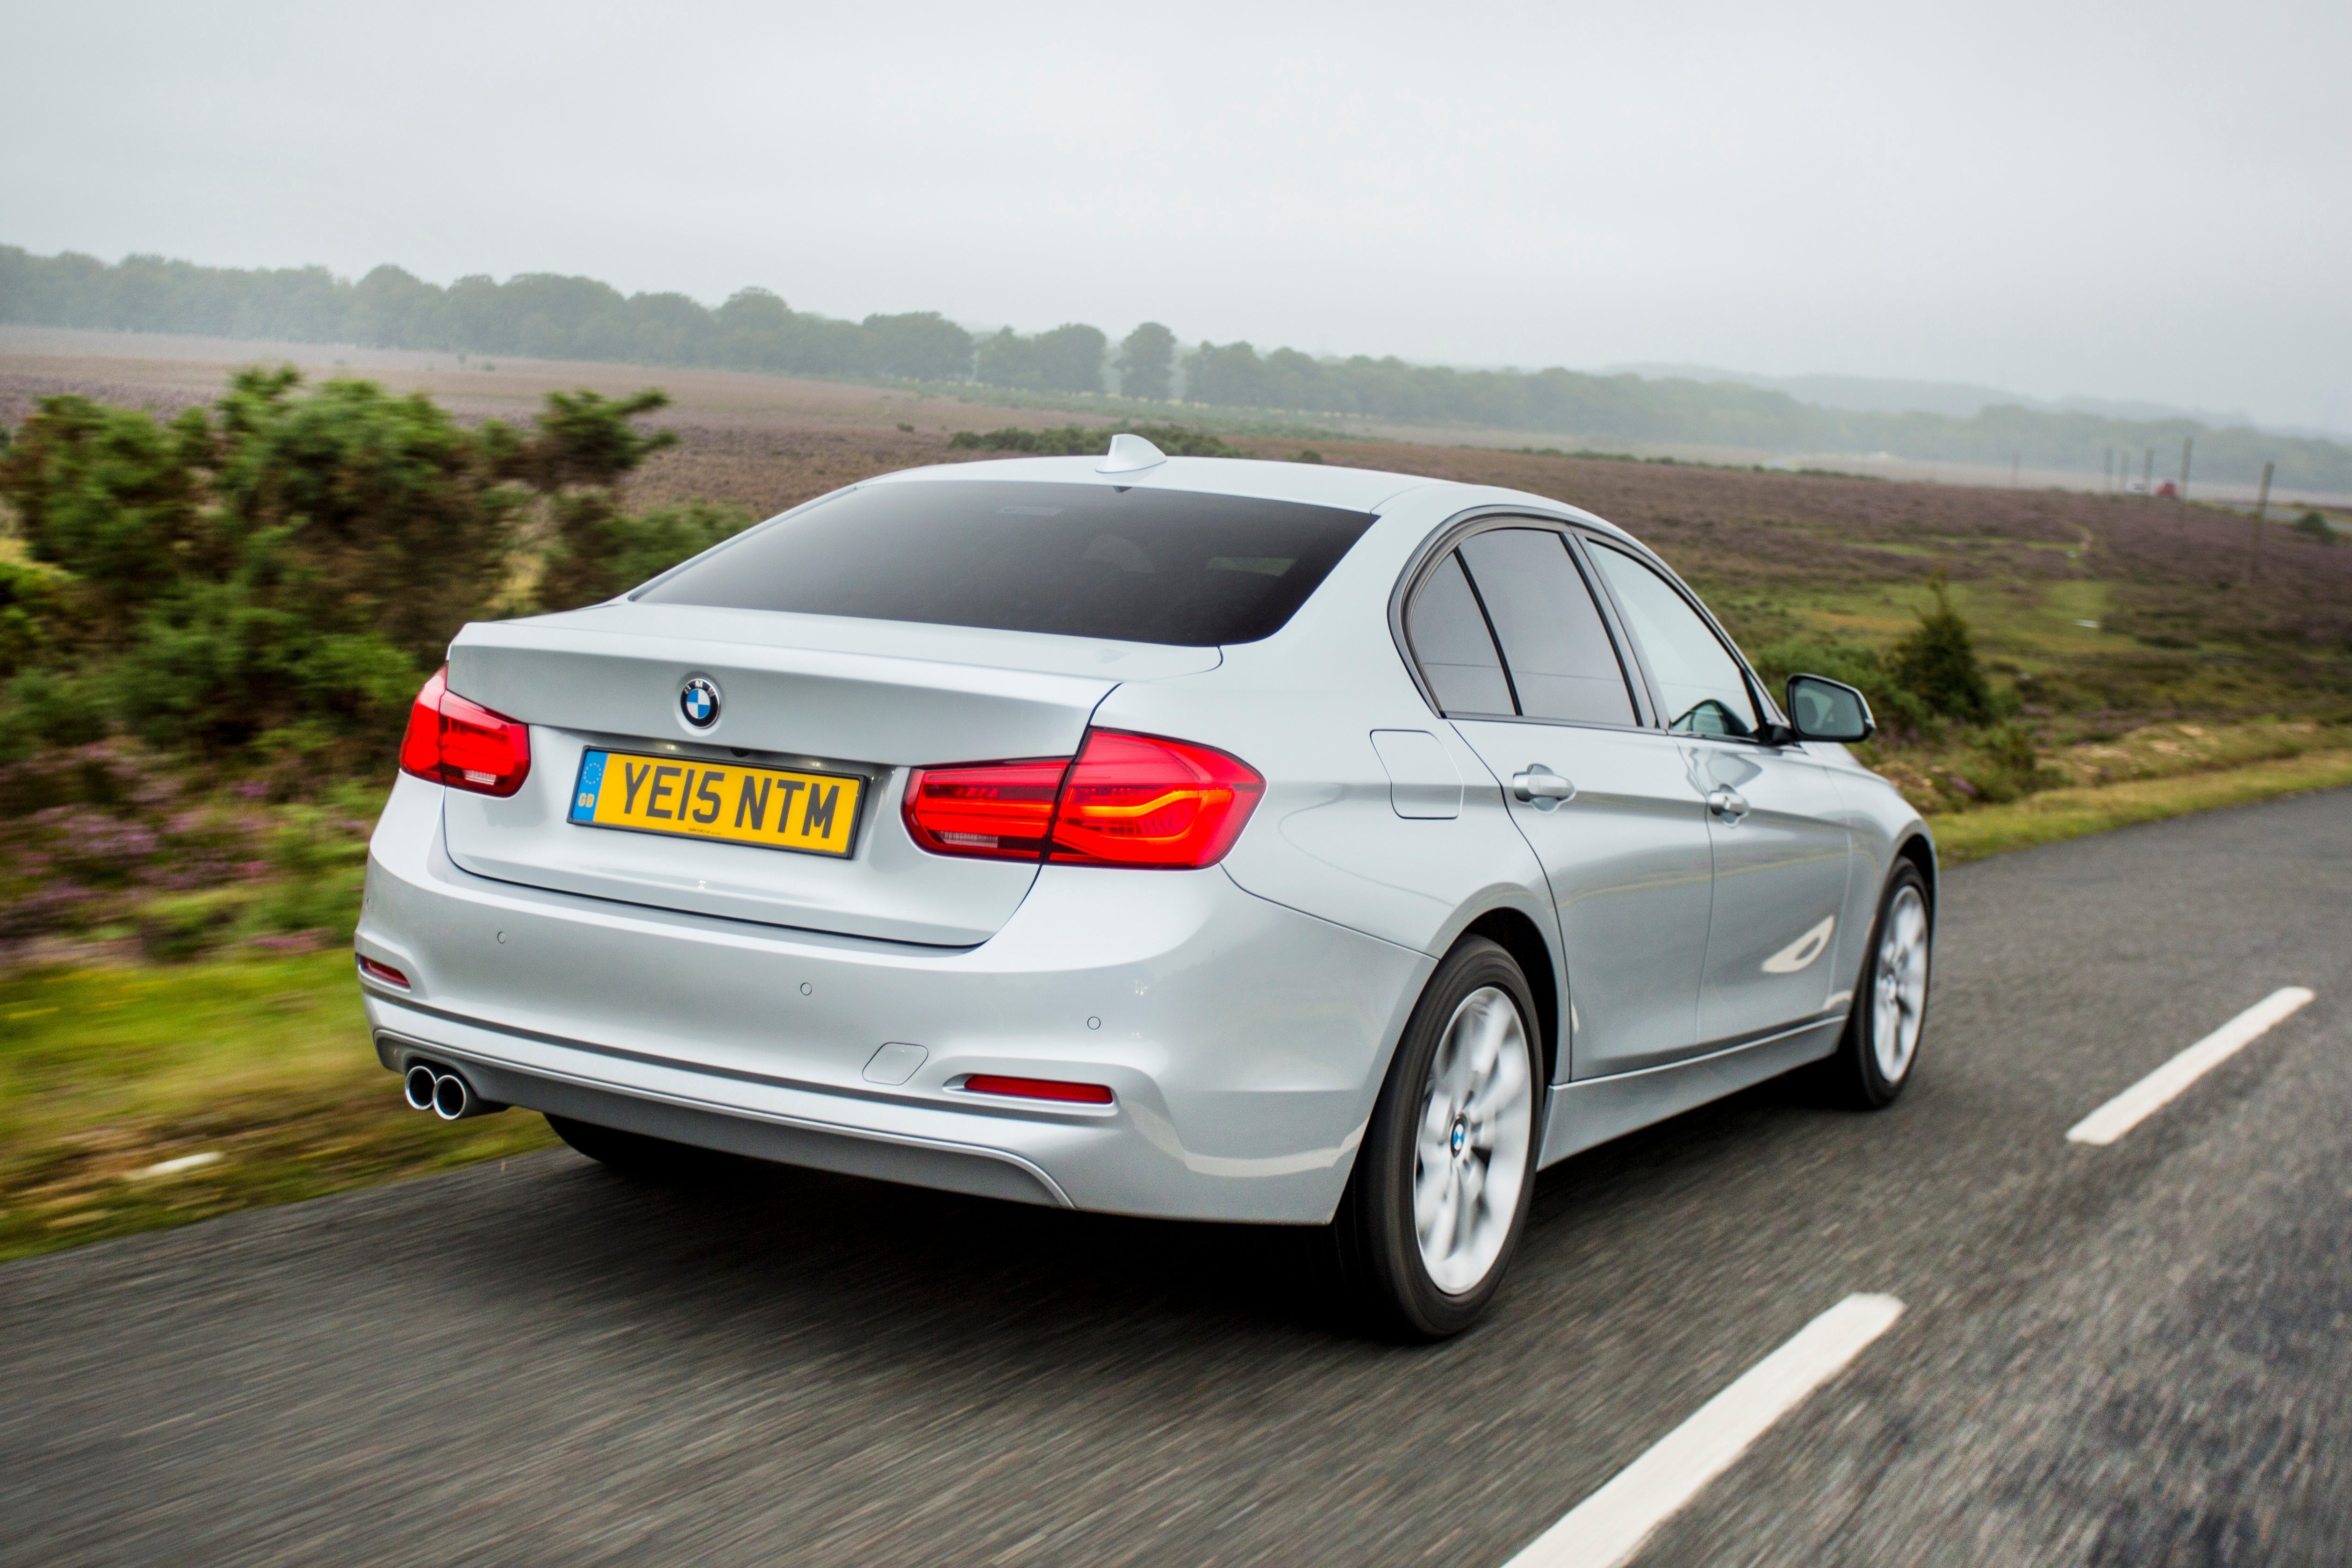 BMW 3 Series (2012-2018) Review: Exterior rear three quarter photo of the BMW 3 Series on the road